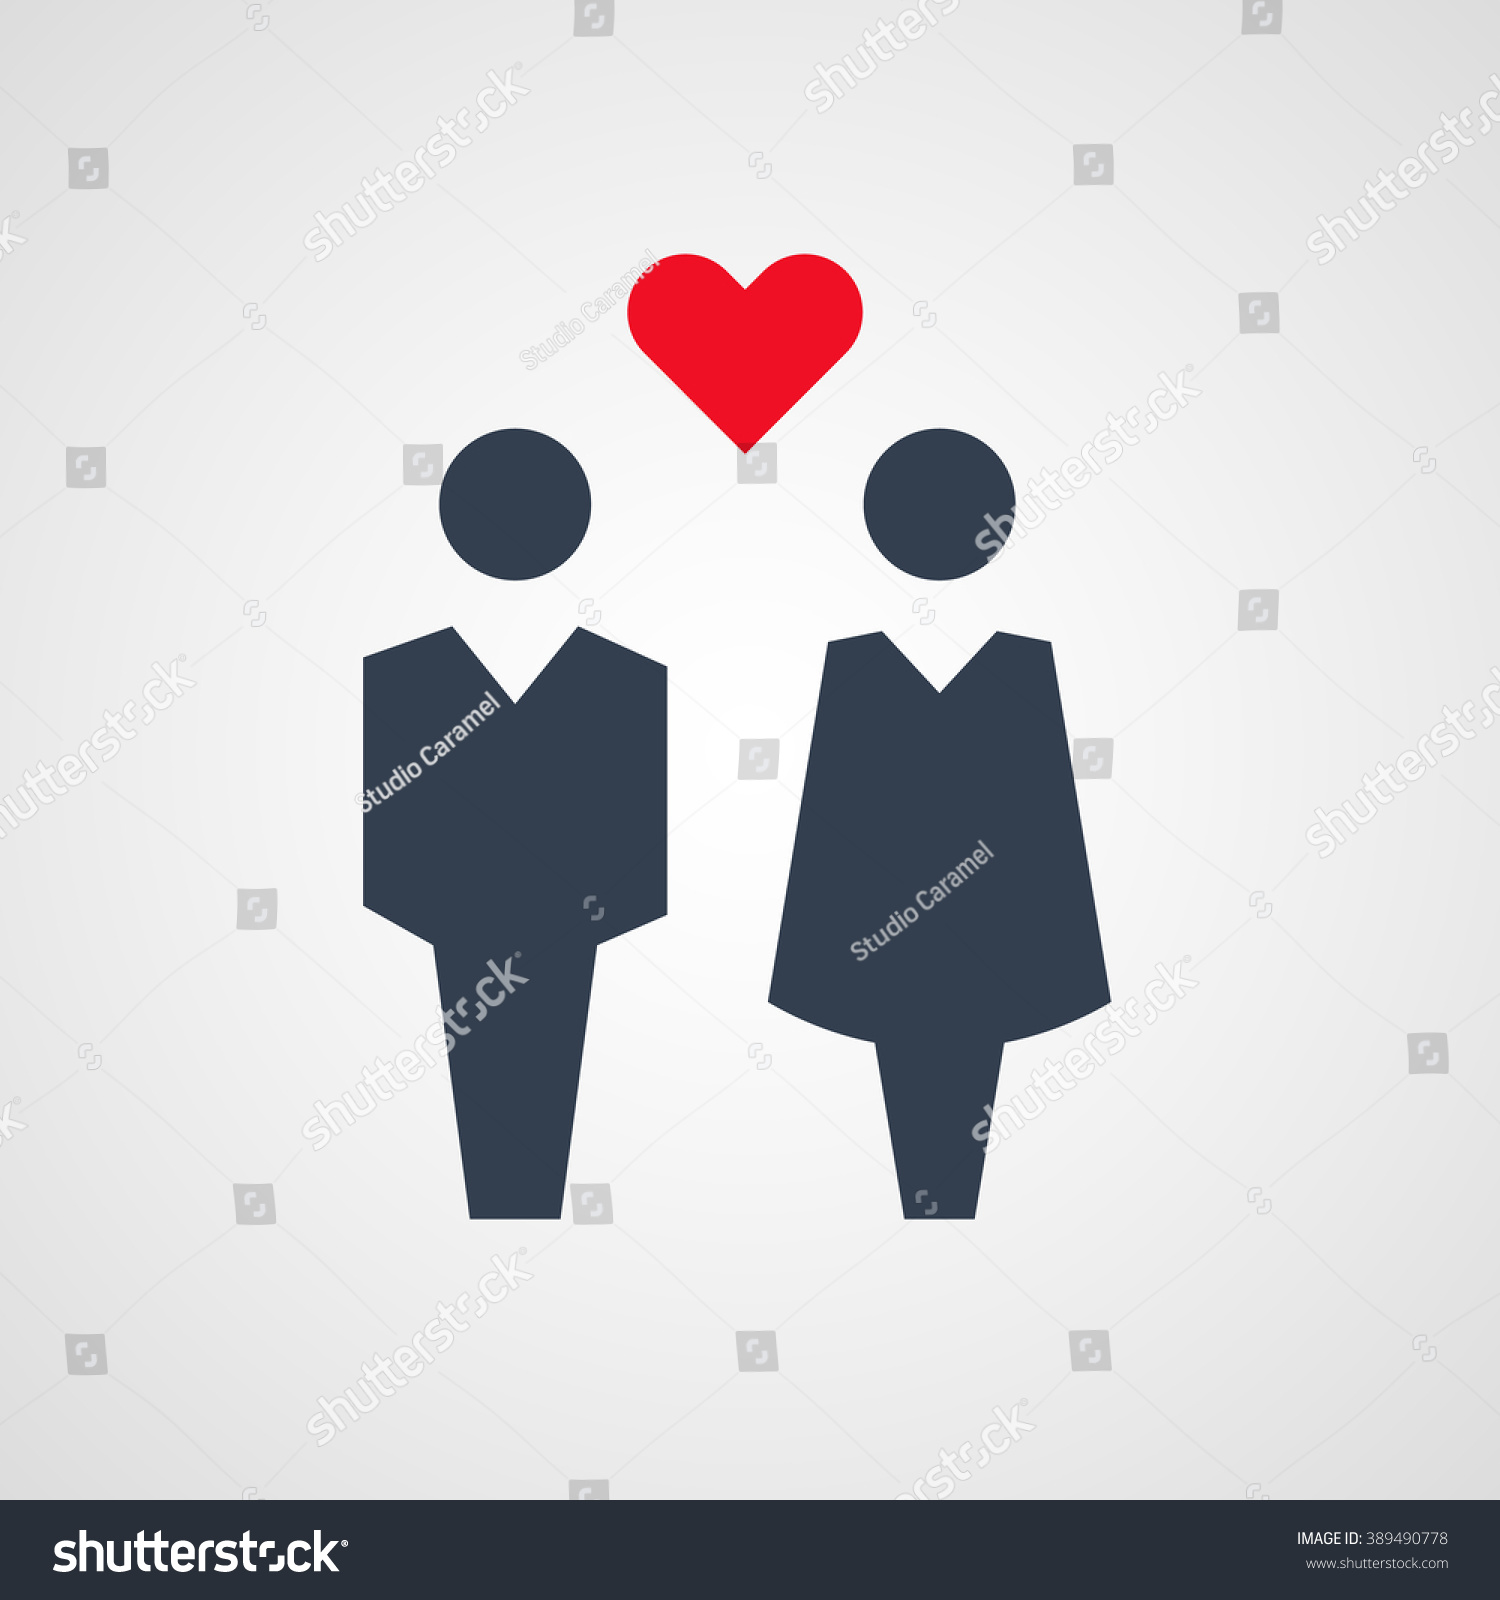 Couple (a man and a woman) with red heart between and above them vector #389490778